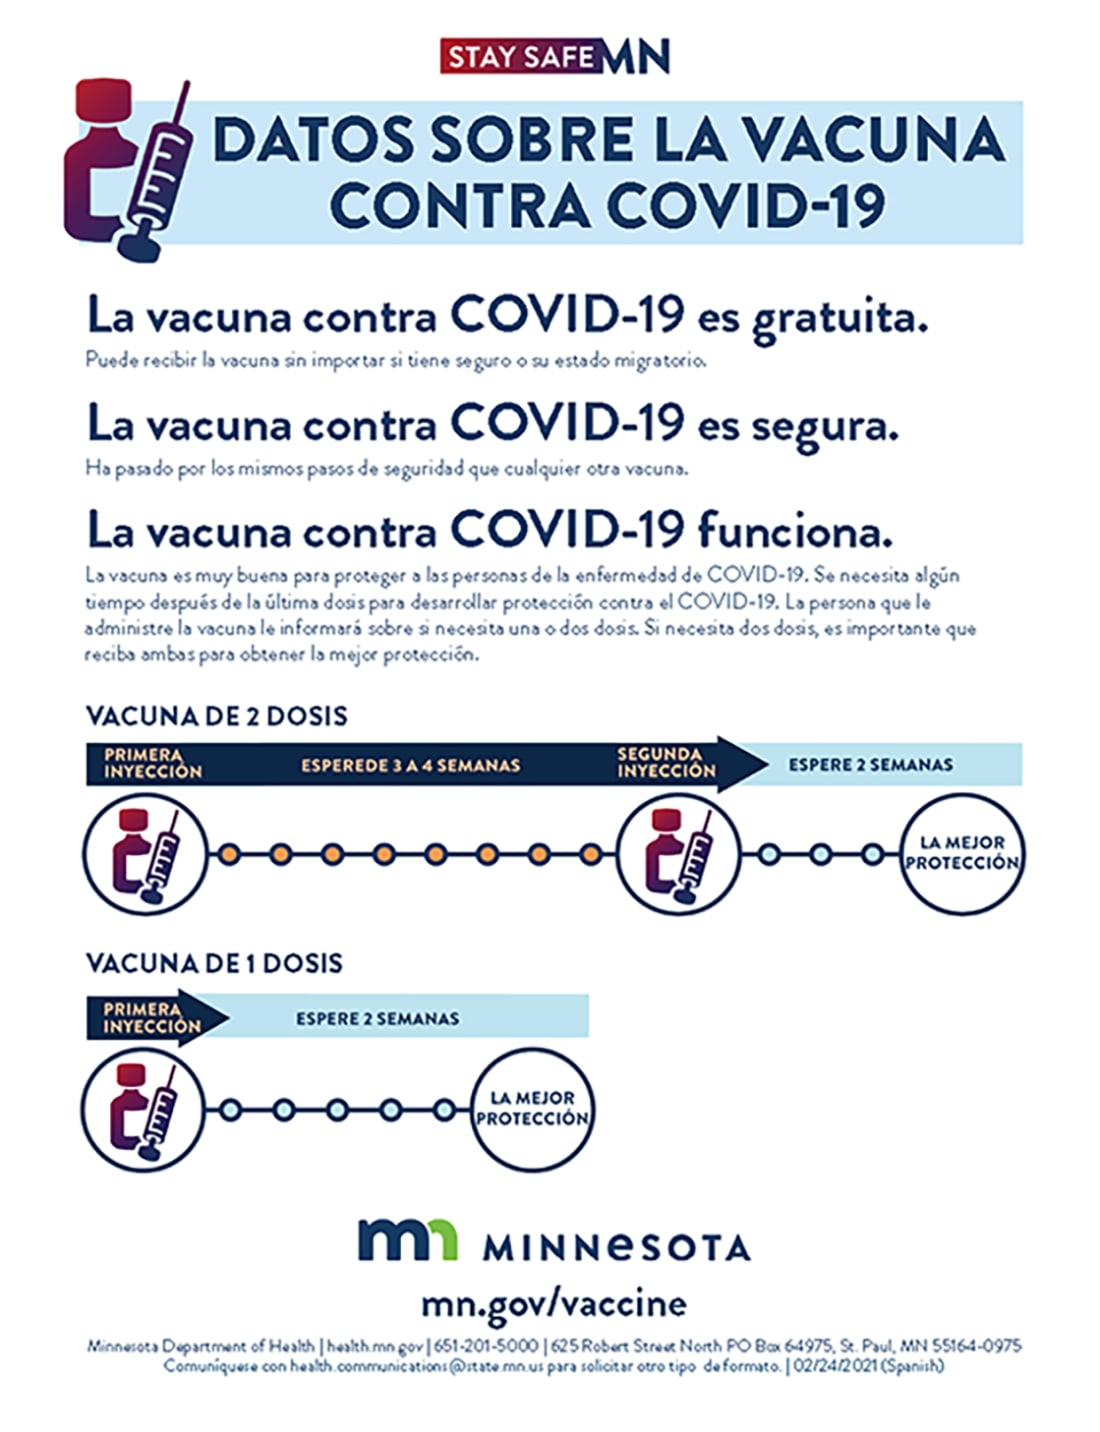 Example Spanish vaccine messaging from the Minnesota Dept. of Health